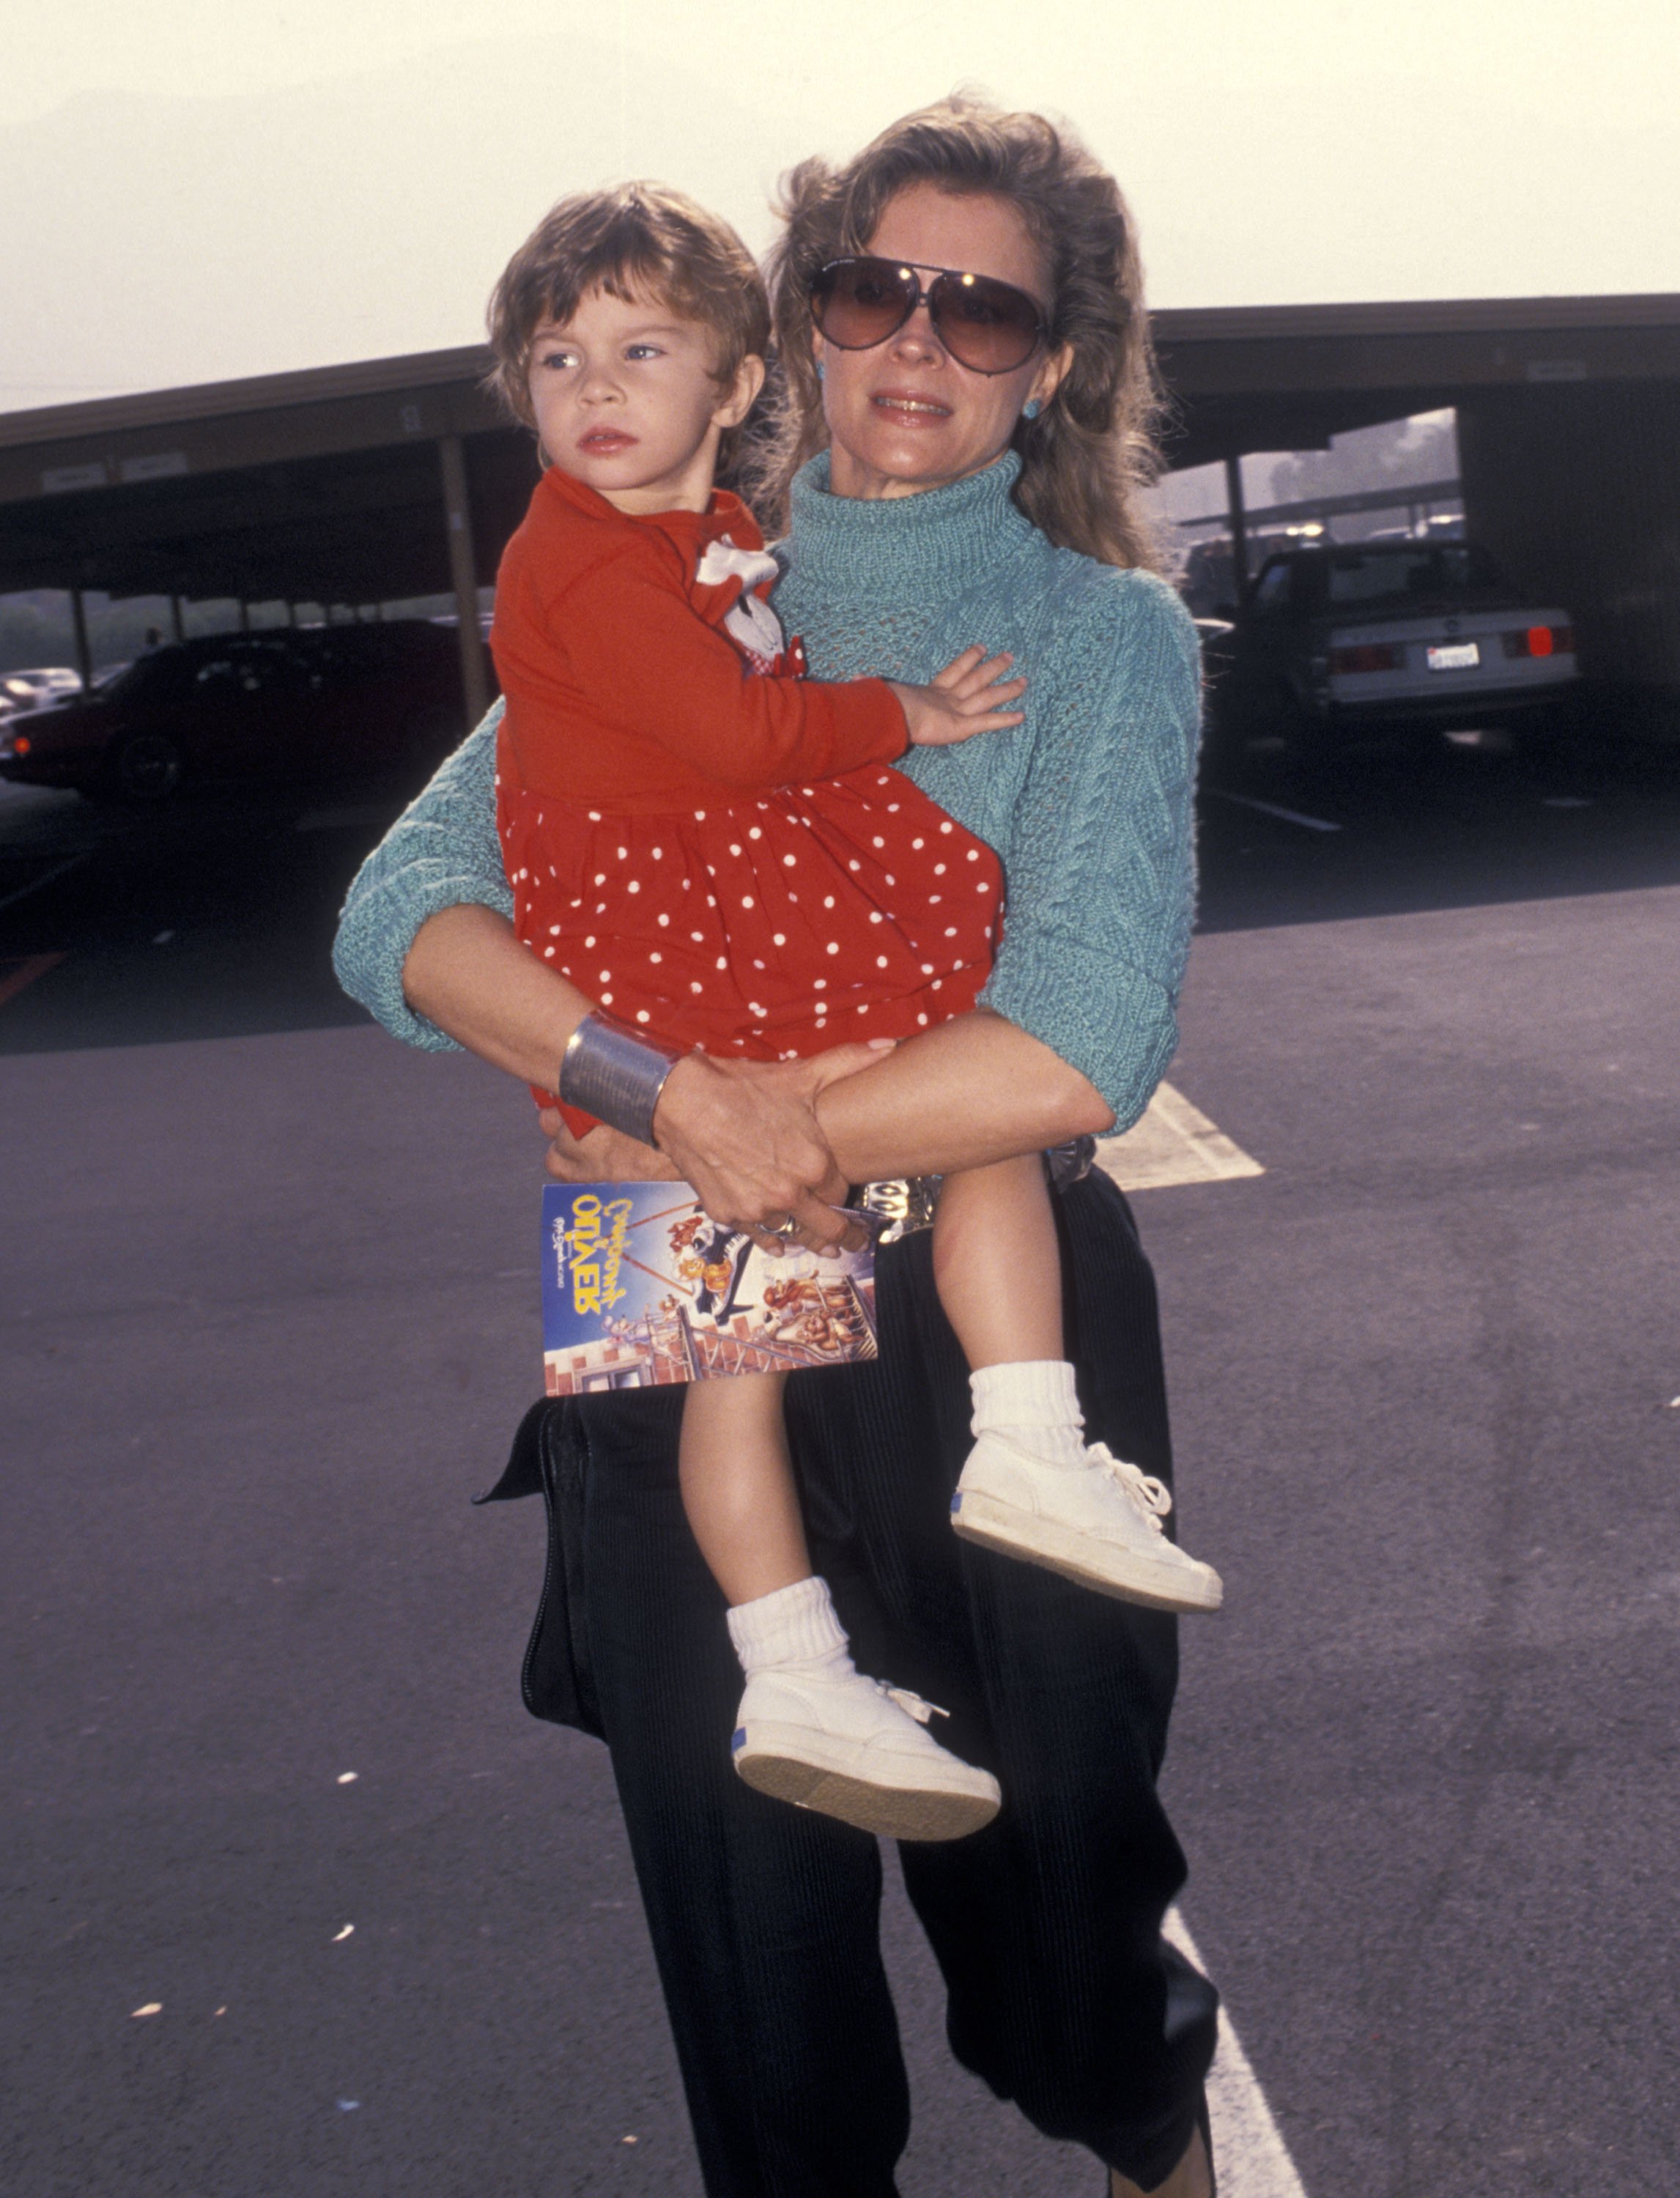 Candice Bergen and daughter Chloe Malle attend the 'Oliver & Company' Burbank Premiere on November 6, 1988 at Walt Disney Studios in Burbank, California | Source: Getty Images